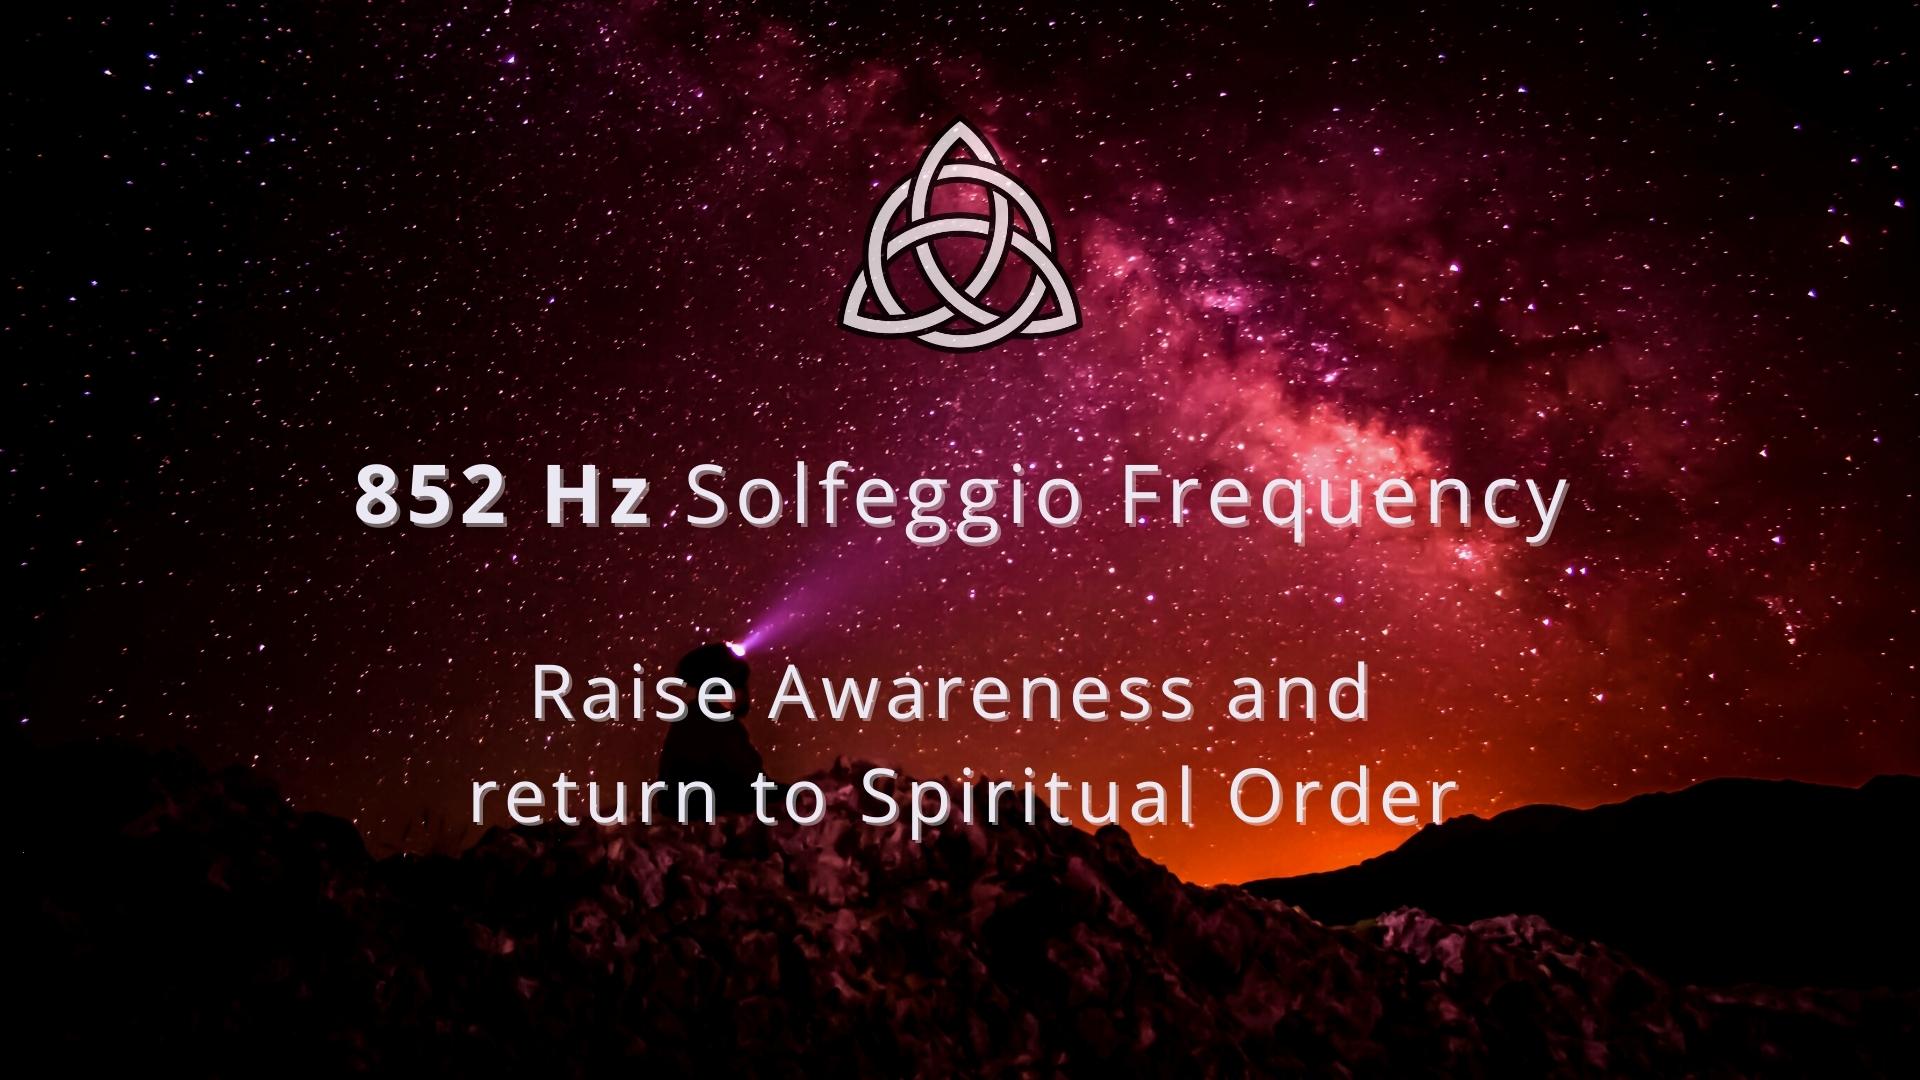 852 Hz Solfeggio Frequency | The Frequency of the Third Eye Chakra